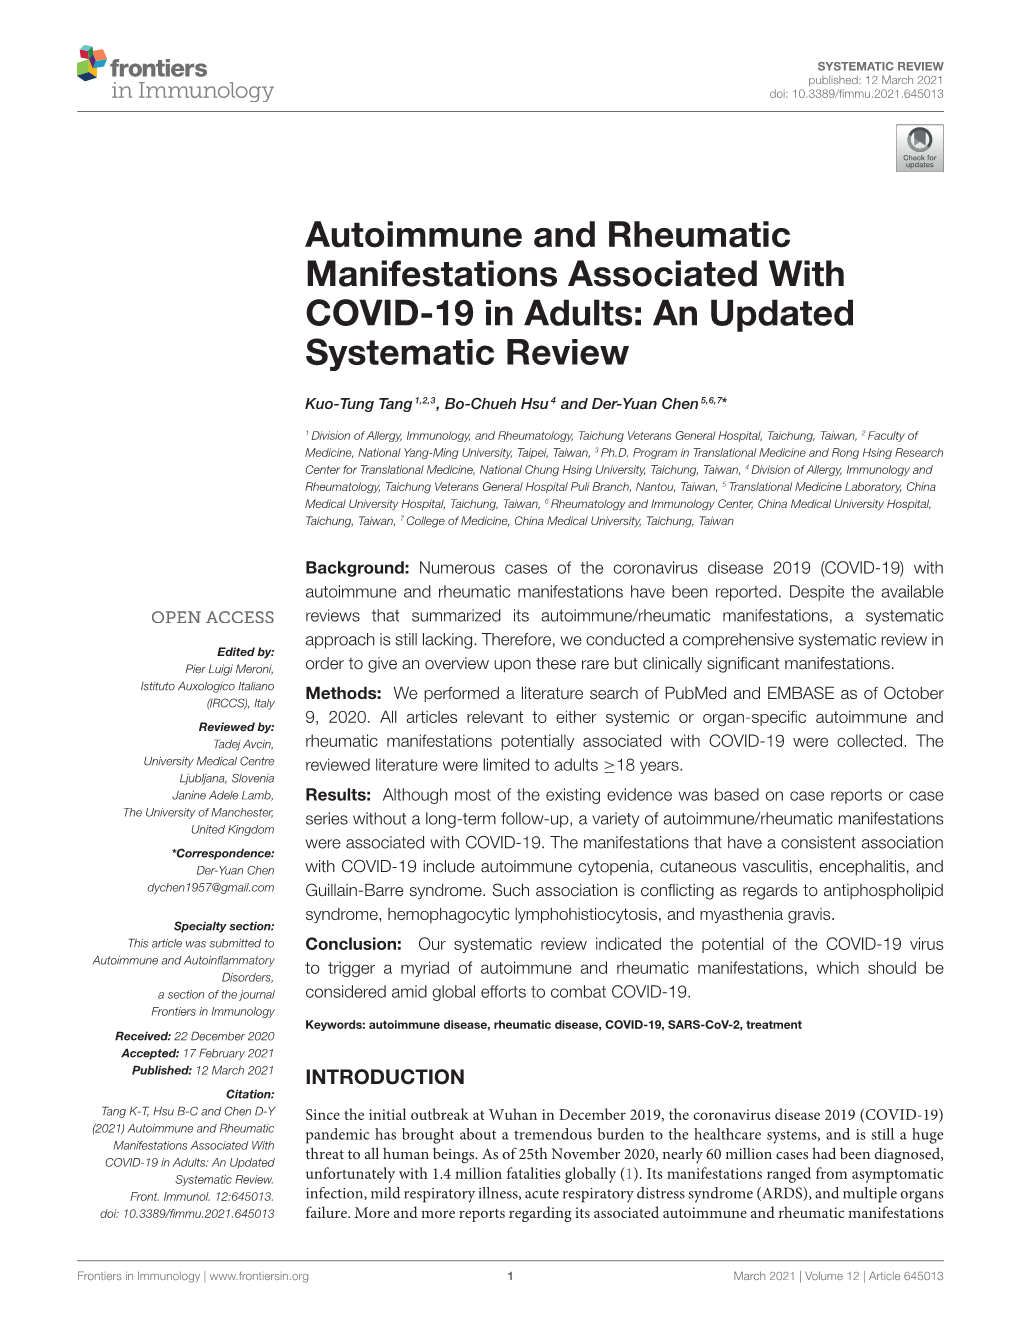 Autoimmune and Rheumatic Manifestations Associated with COVID-19 in Adults: an Updated Systematic Review